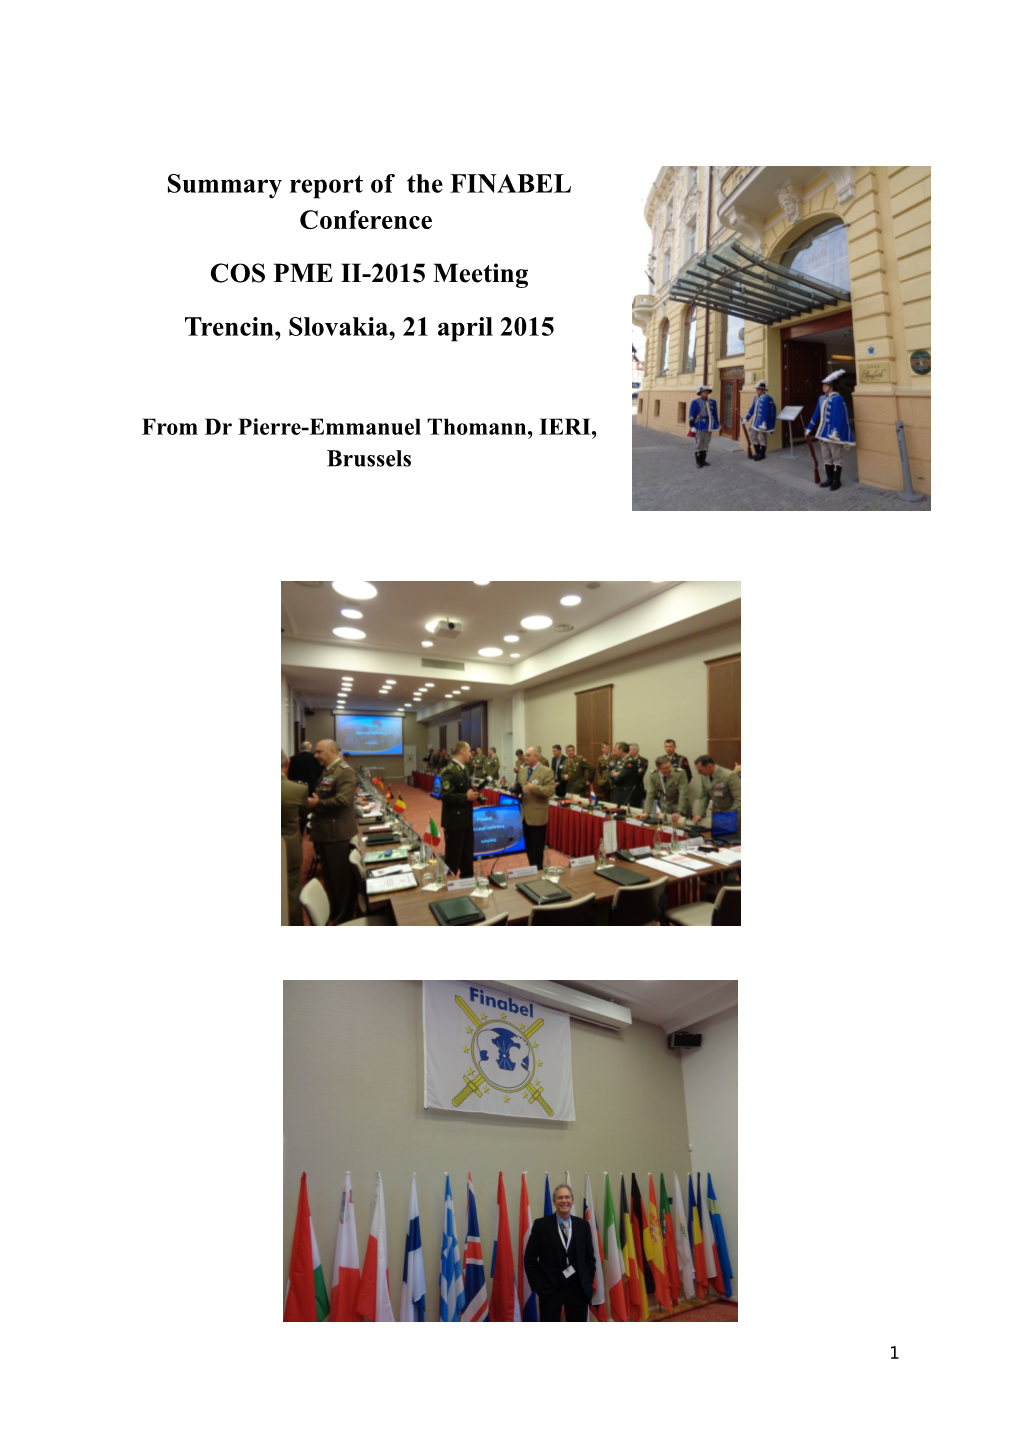 Summary Report of the FINABEL Conference COS PME II-2015 Meeting Trencin, Slovakia, 21 April 2015